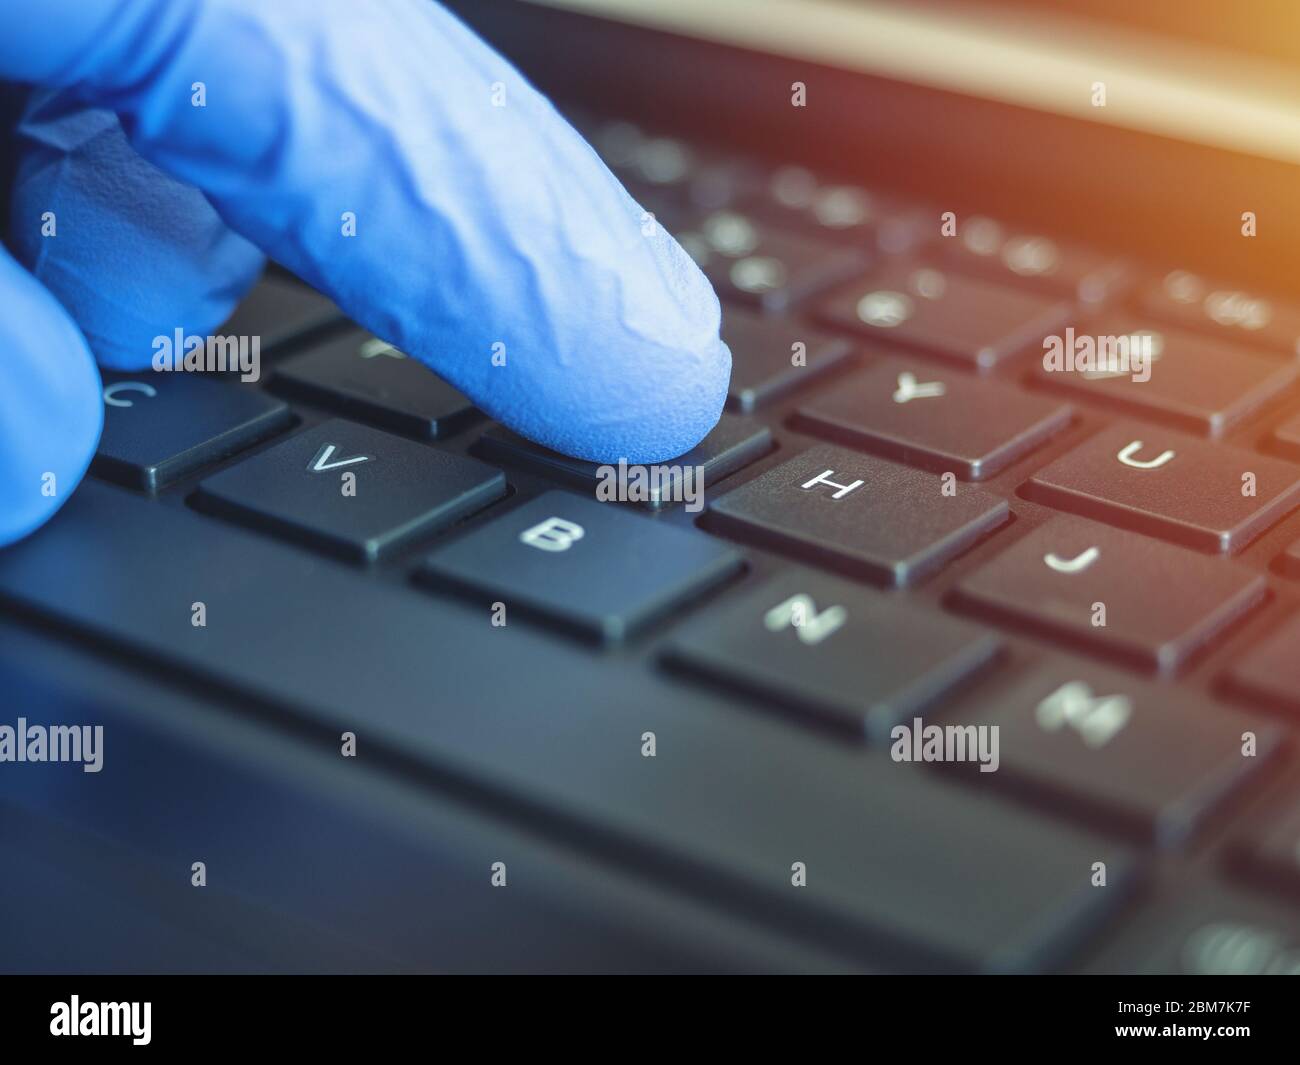 Online quarantine training. Remote online work. Coronovirus. Epidemic.  Hands in protective medical gloves are typing on the keyboard Stock Photo -  Alamy